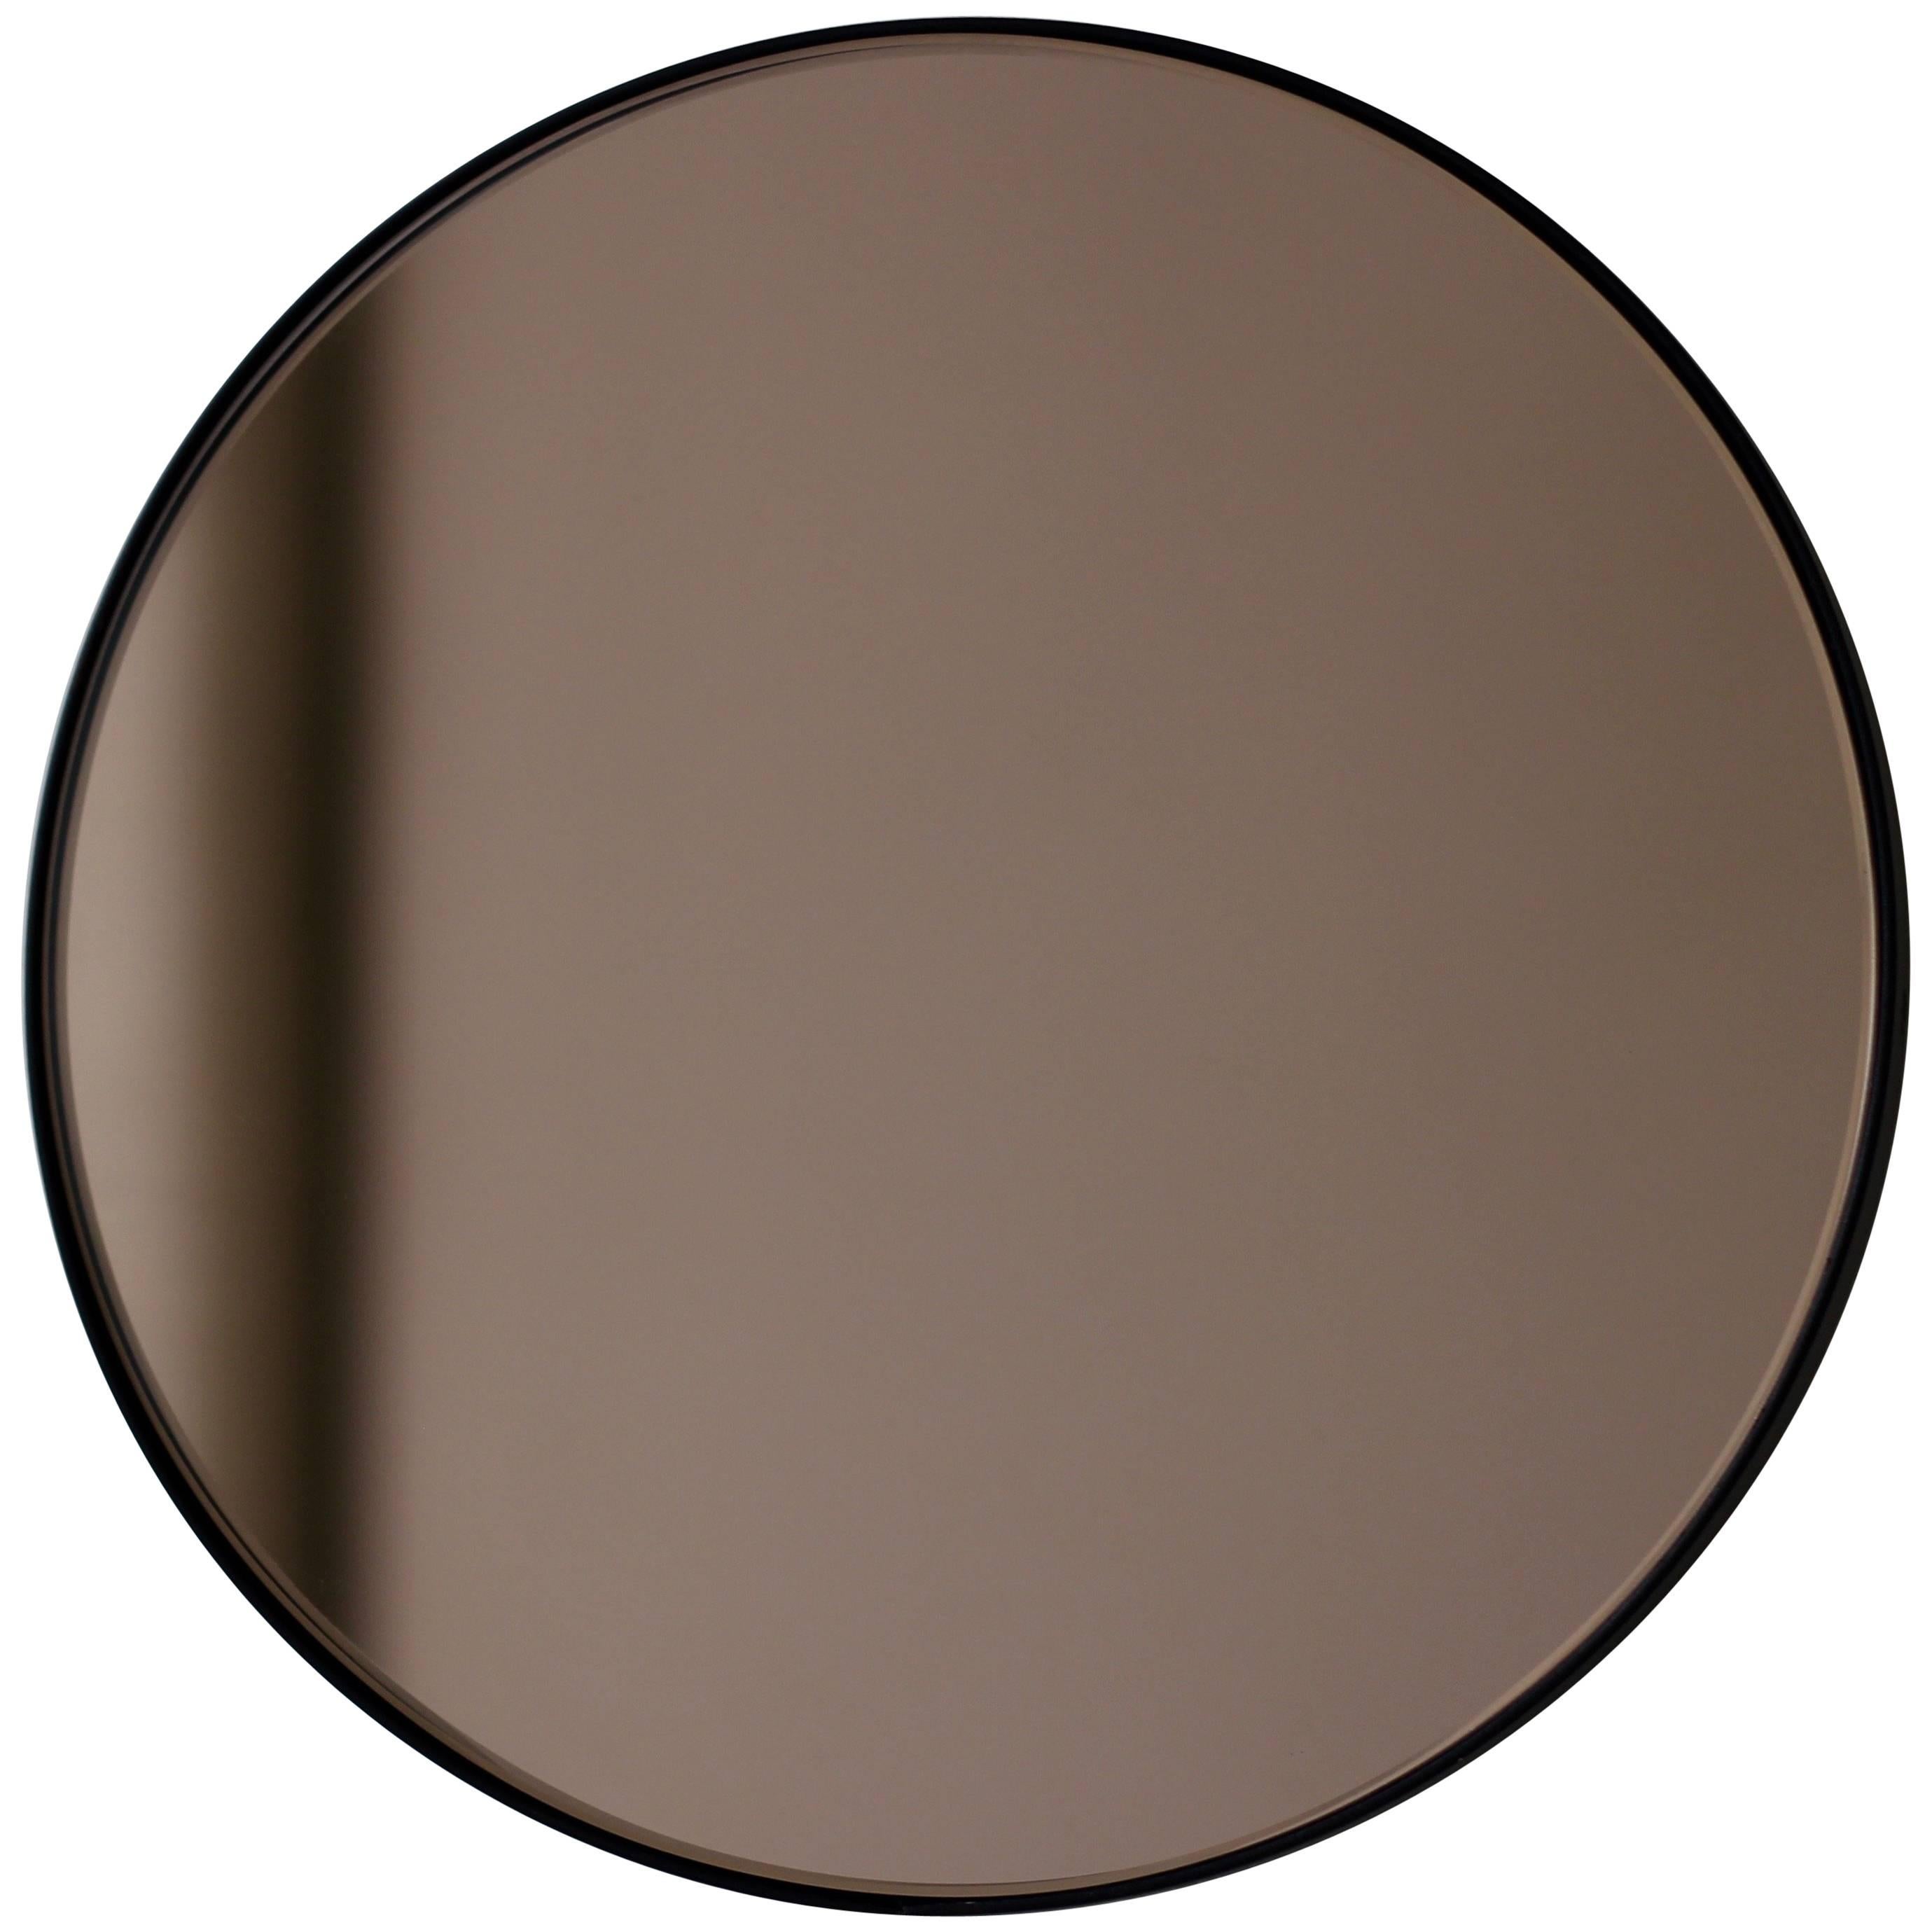 Orbis Bronze Tinted Minimalist Circular Mirror with Black Frame, Small For Sale